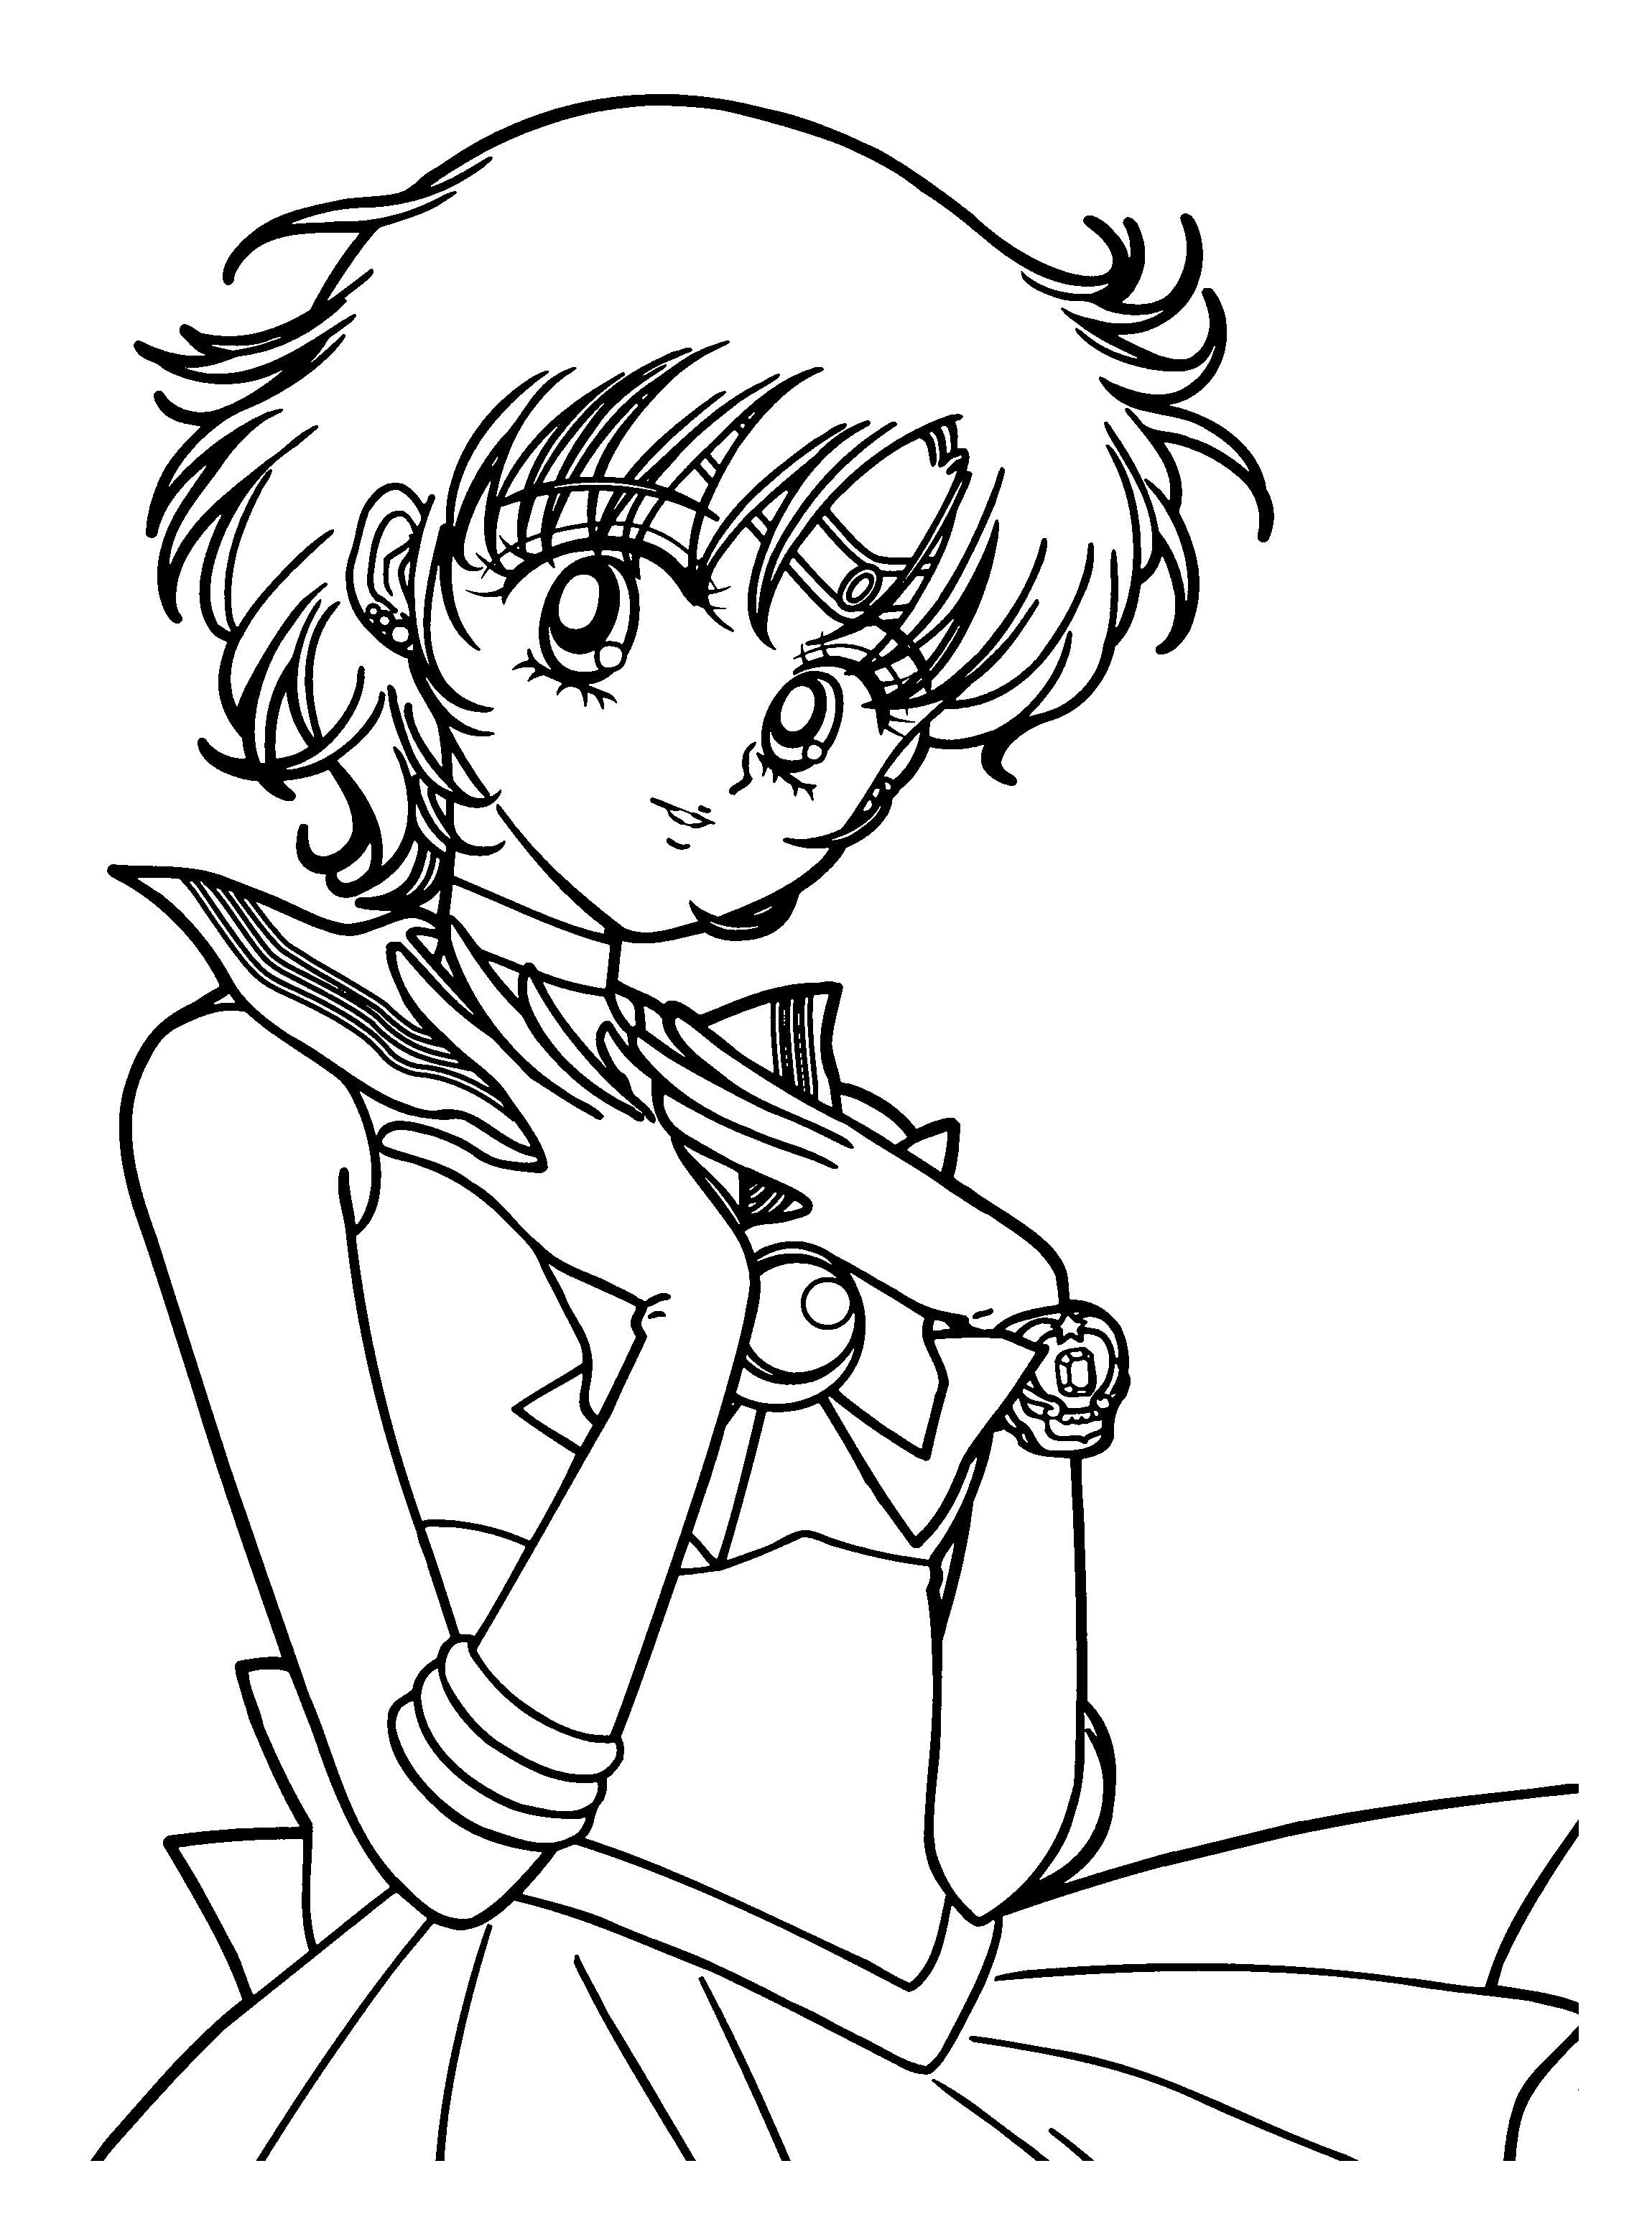 Coloring Page Tv Series Coloring Page Sailormoon | PicGifs.com